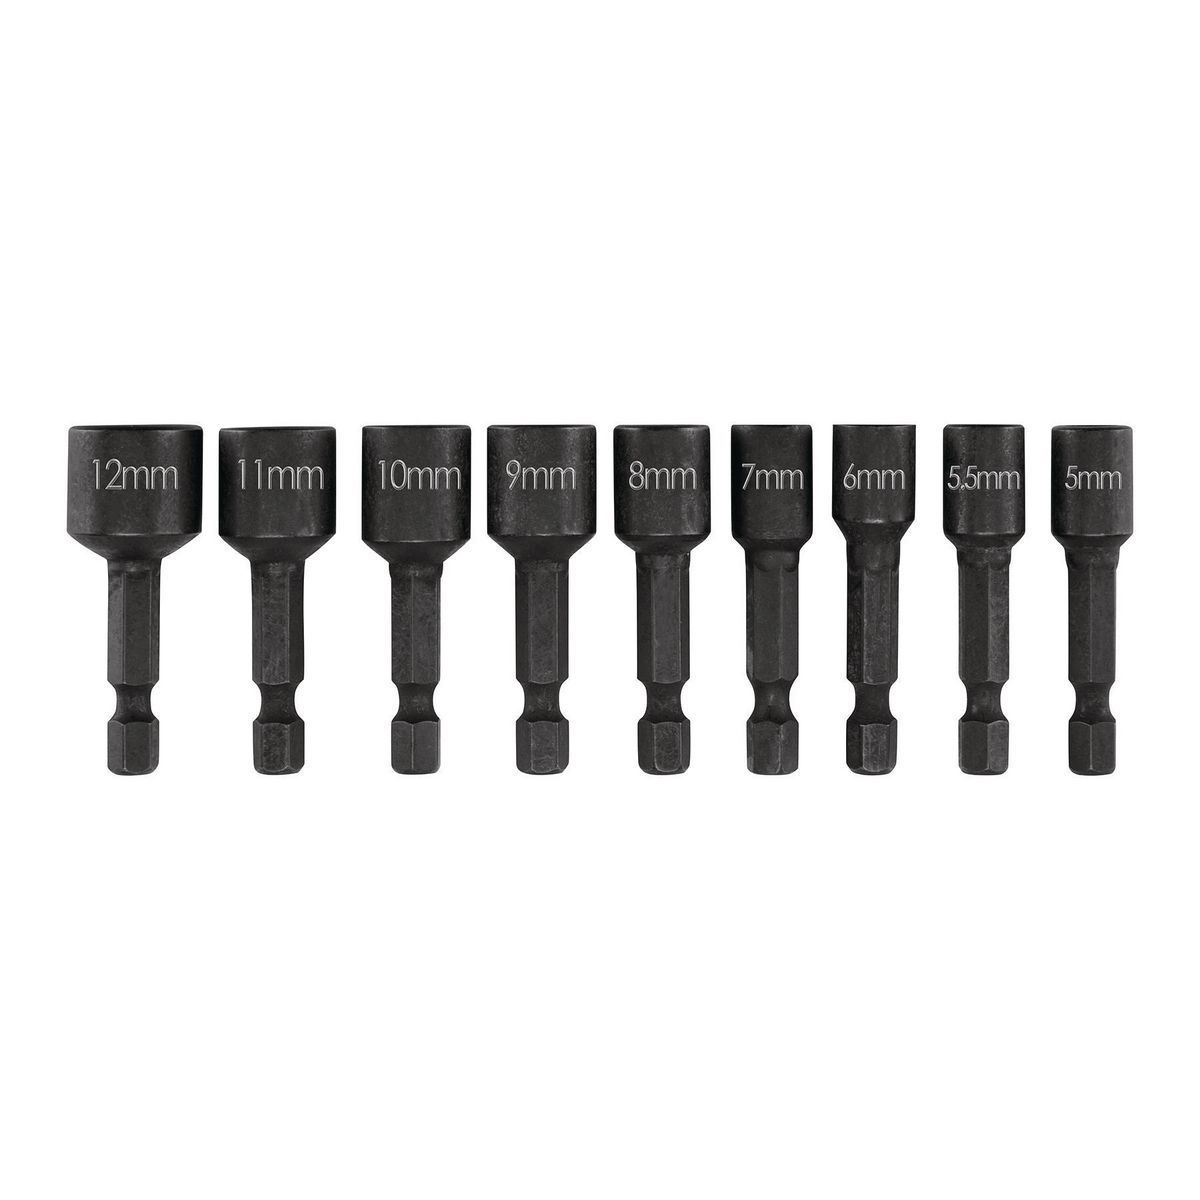 HERCULES 1-3/4 in. Impact Rated Magnetic Metric Nut Setters, 9-Piece